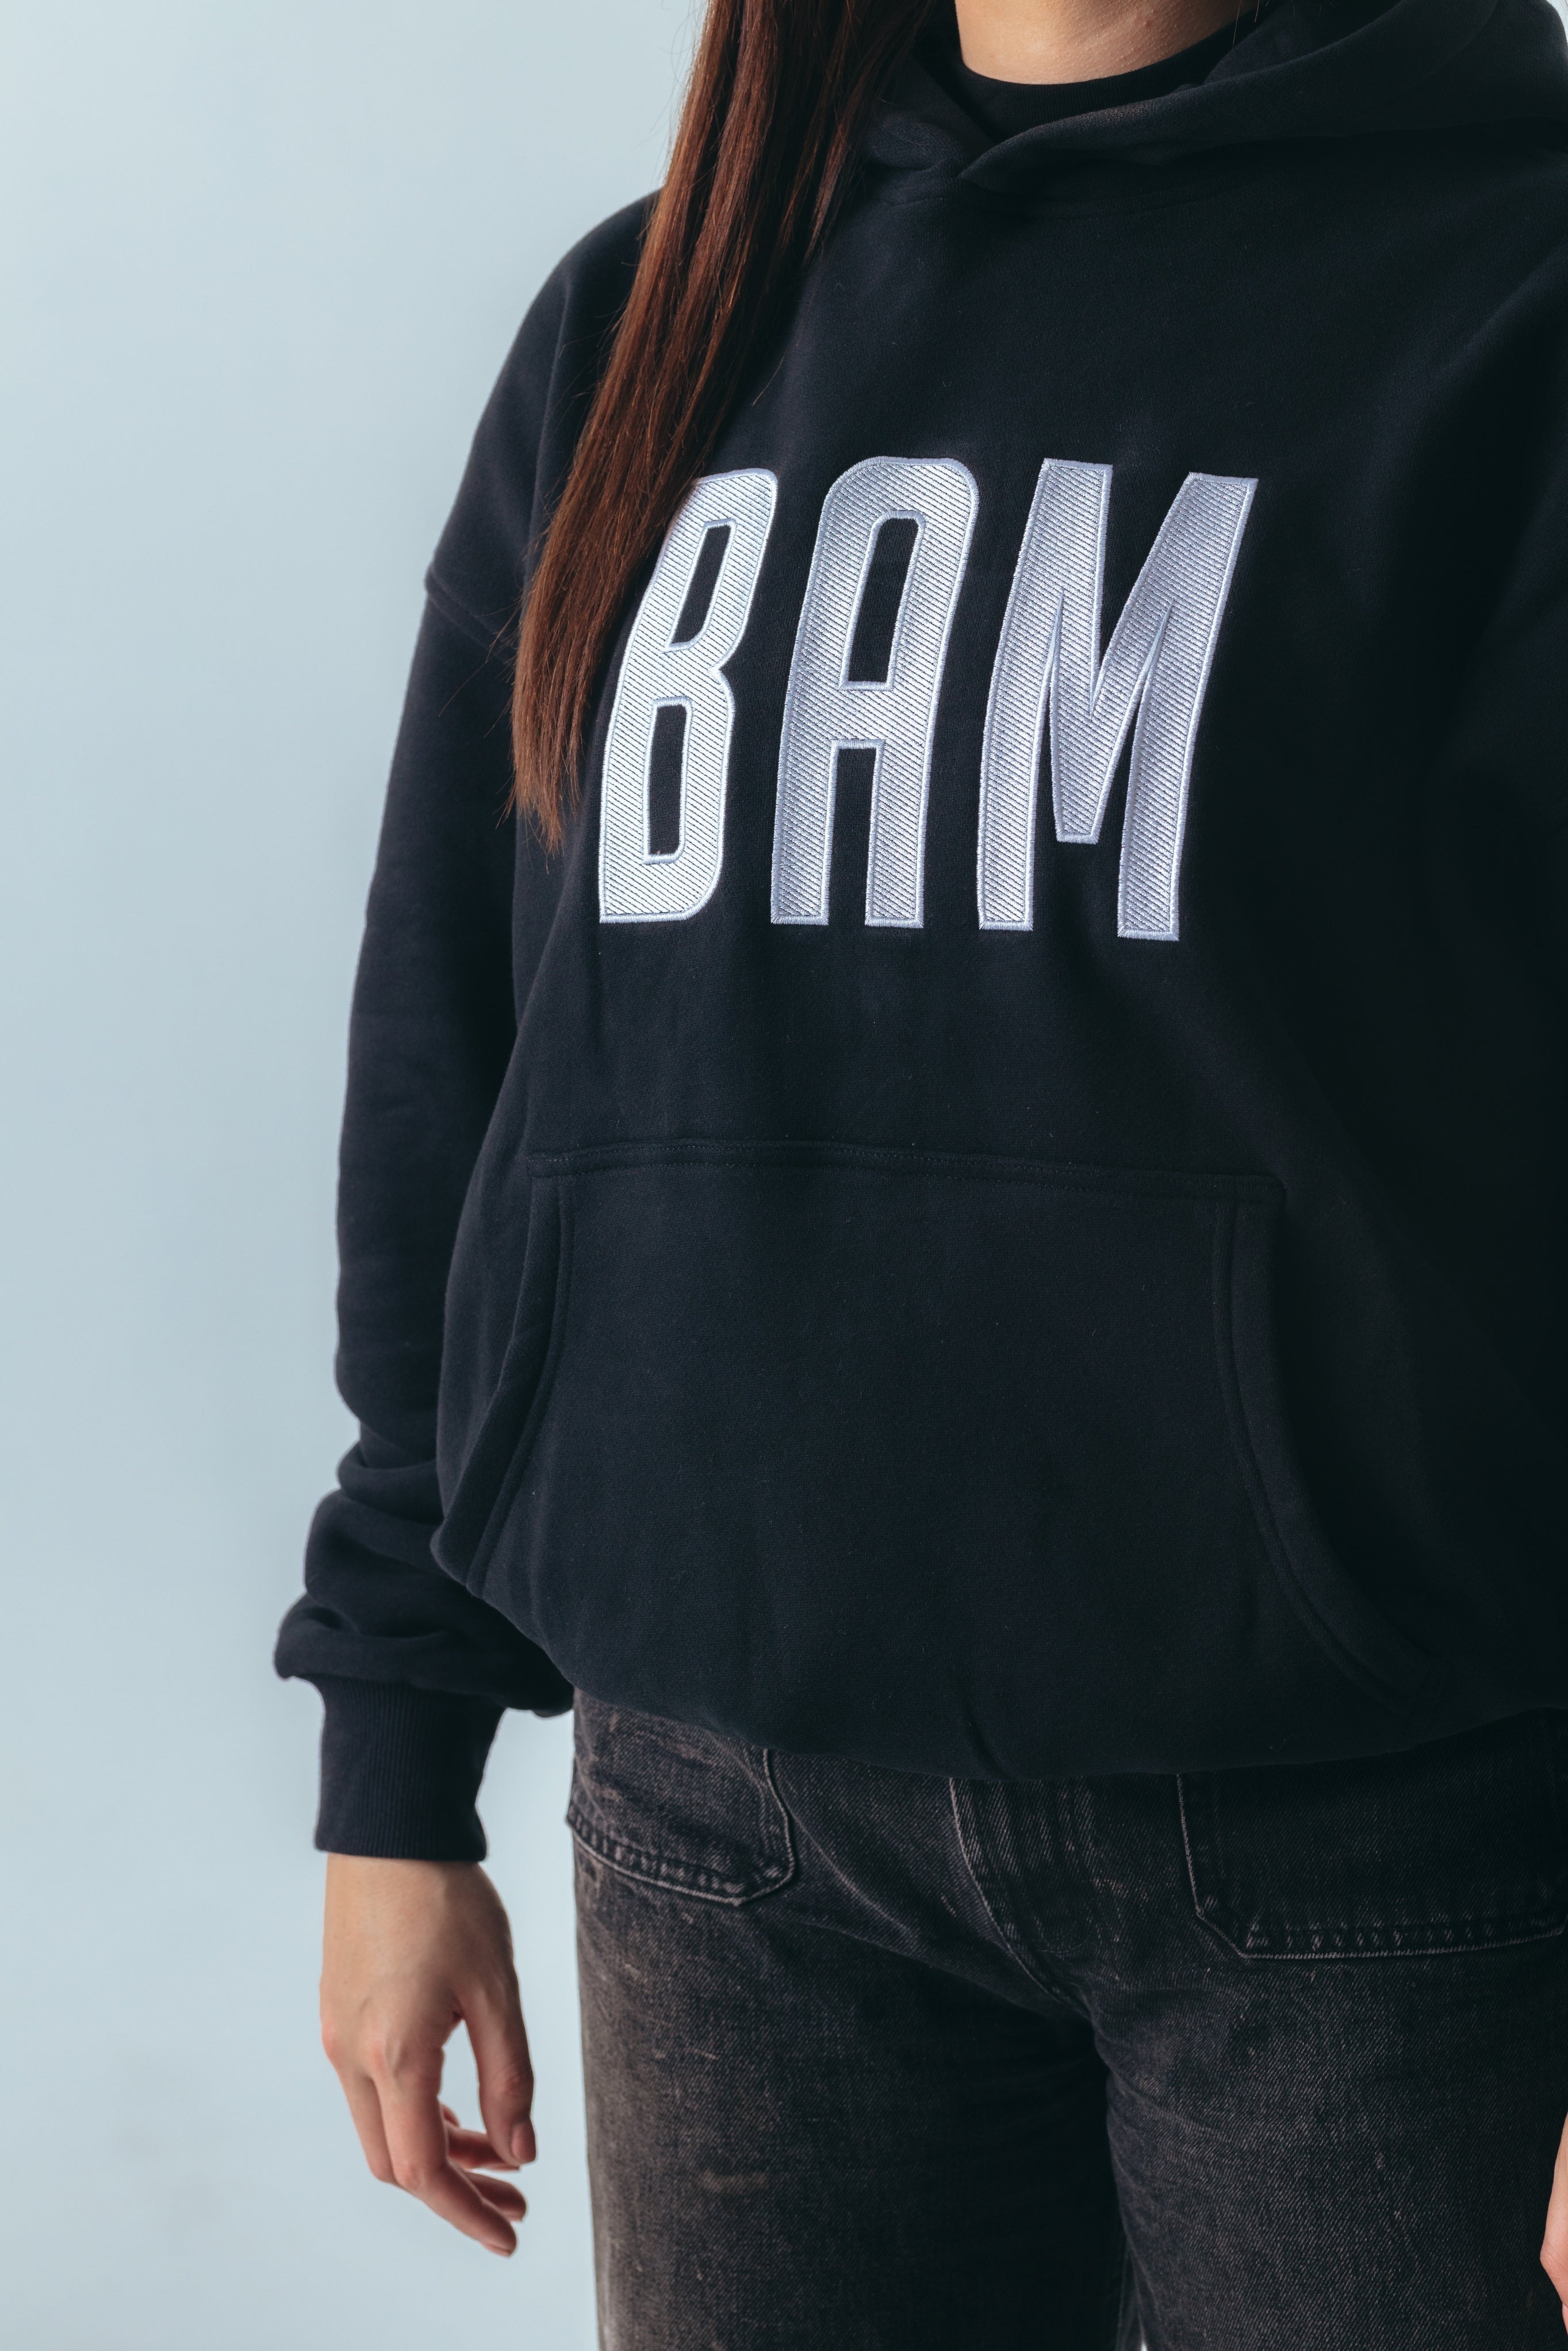 Our staple hoodie.  Features an oversized fit, inverted waistband and embroidered logo detailing.